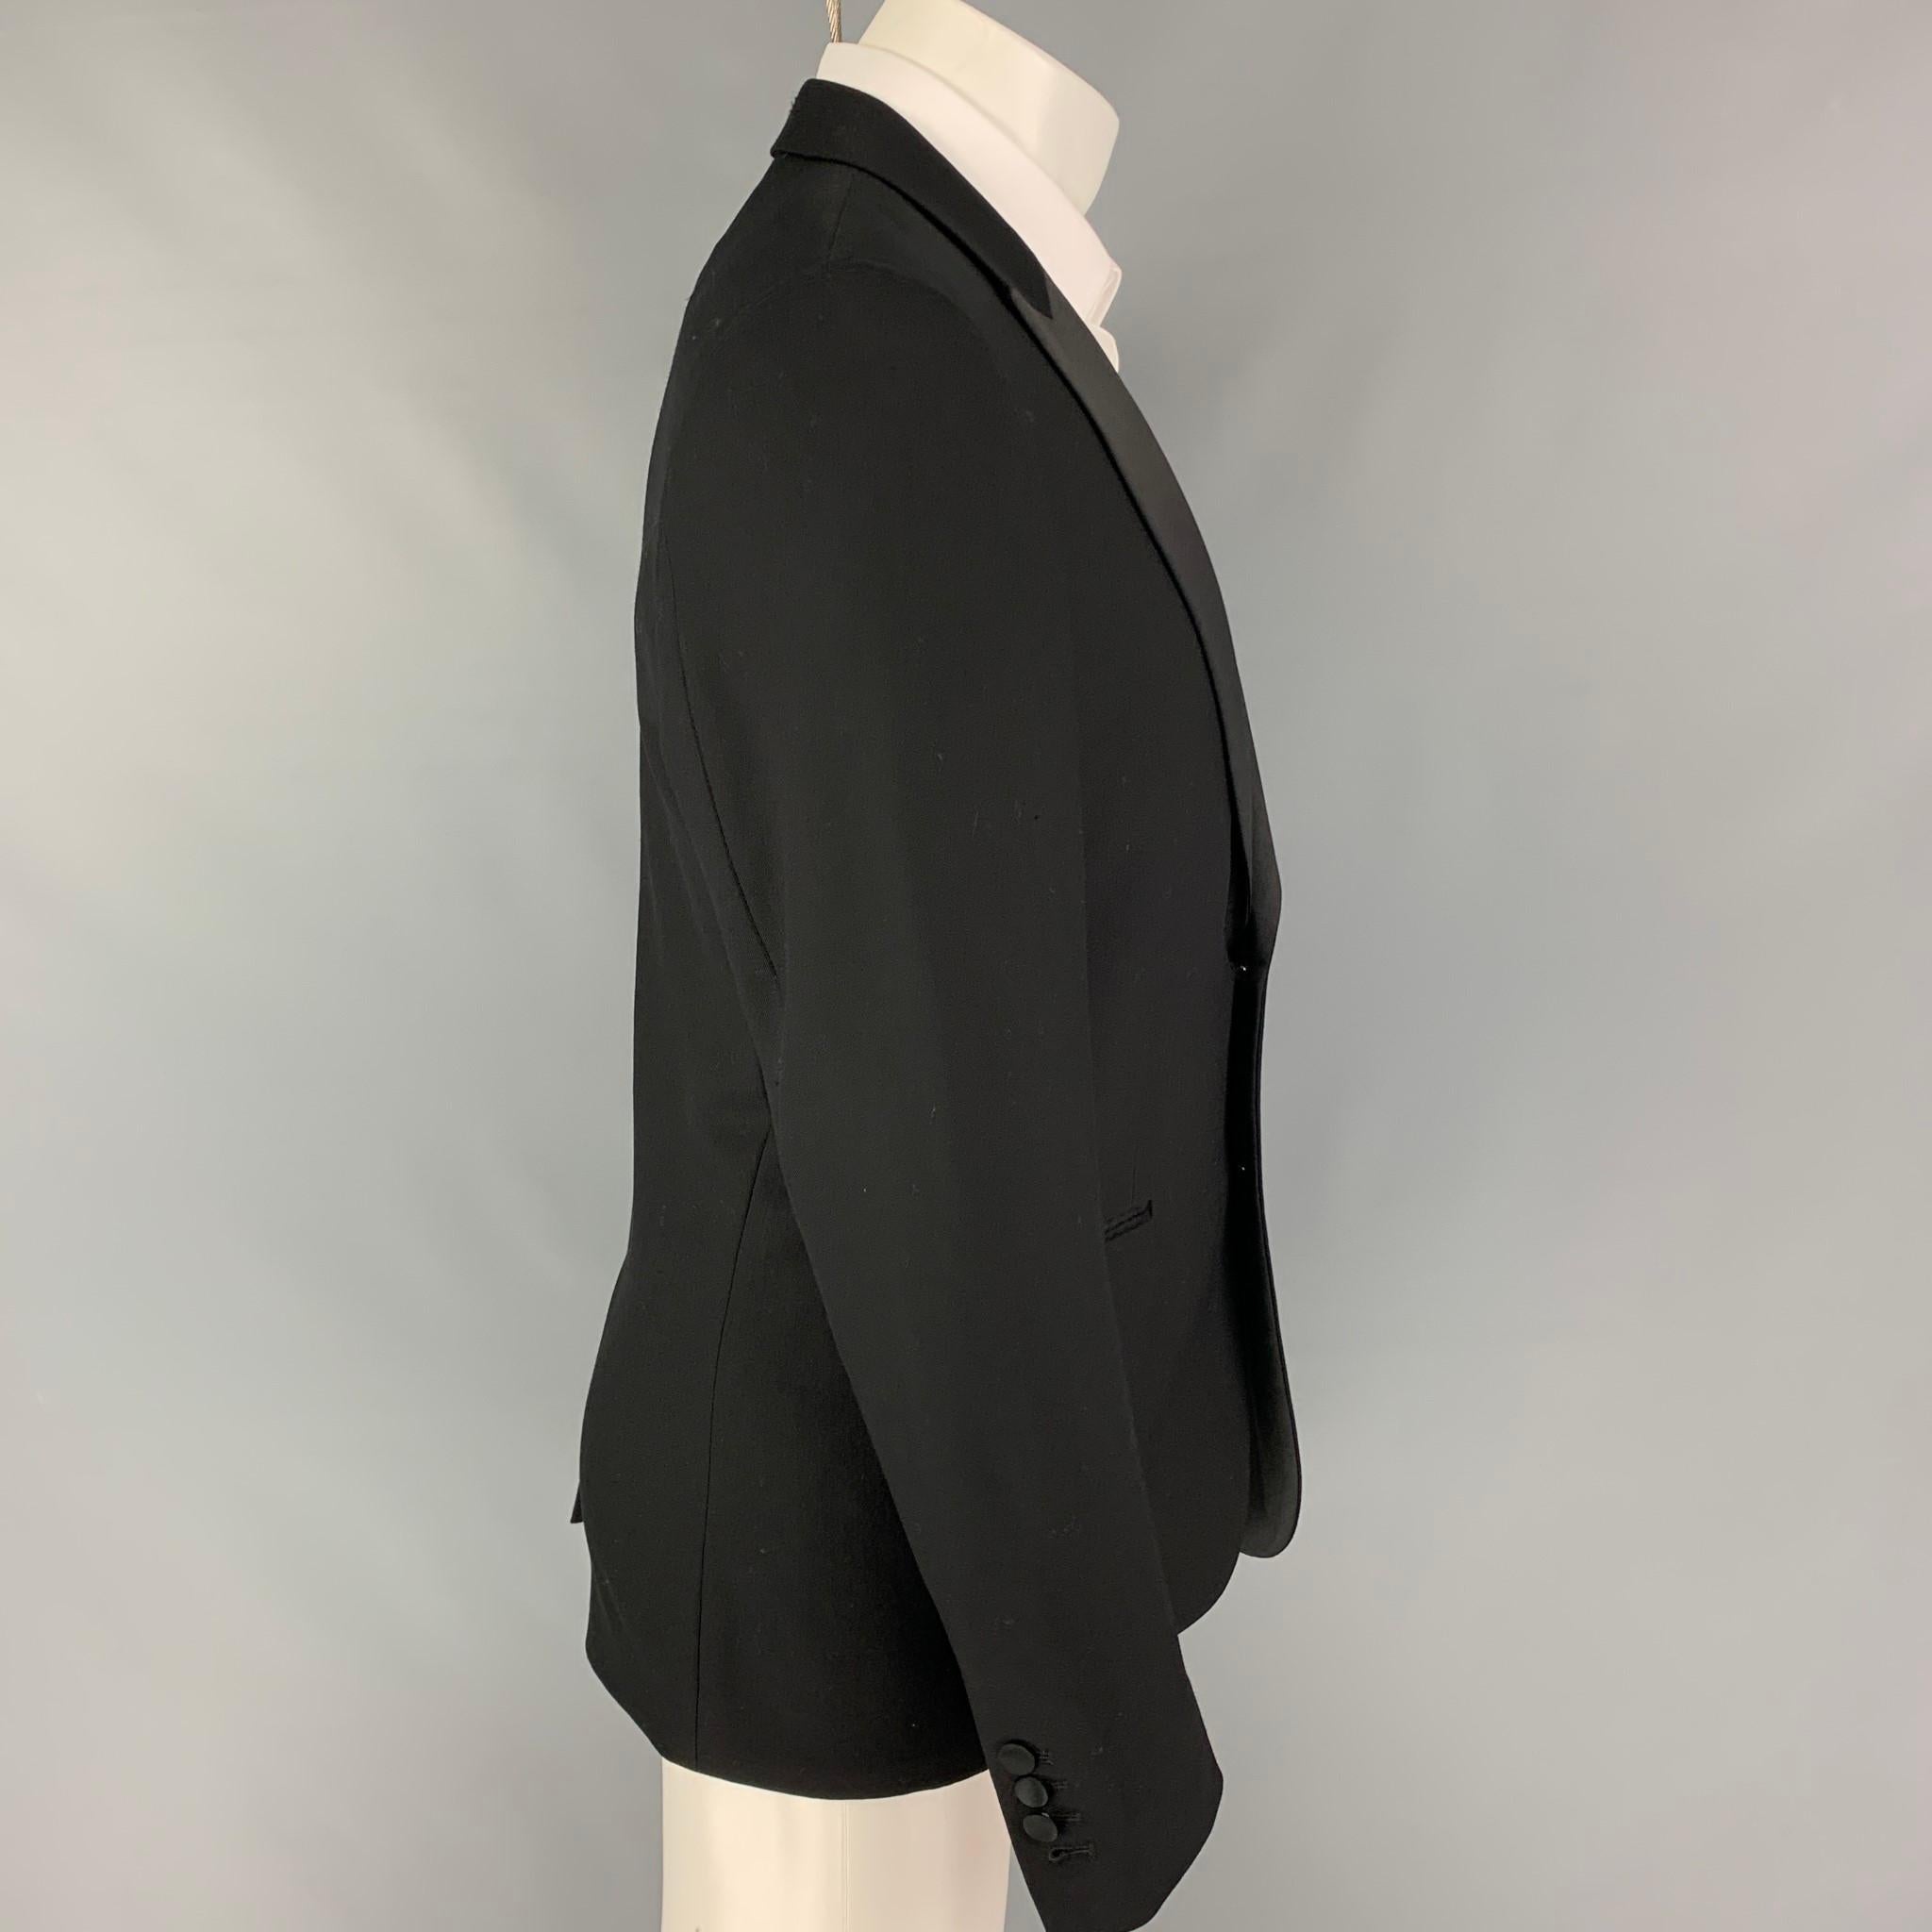 SANDRO sport coat comes in a black wool with a full liner featuring a peak lapel, slit pockets, single back vent, and a double button closure. 

Very Good Pre-Owned Condition. Light mark at logo tag.
Marked: 50

Measurements:

Shoulder: 17.5